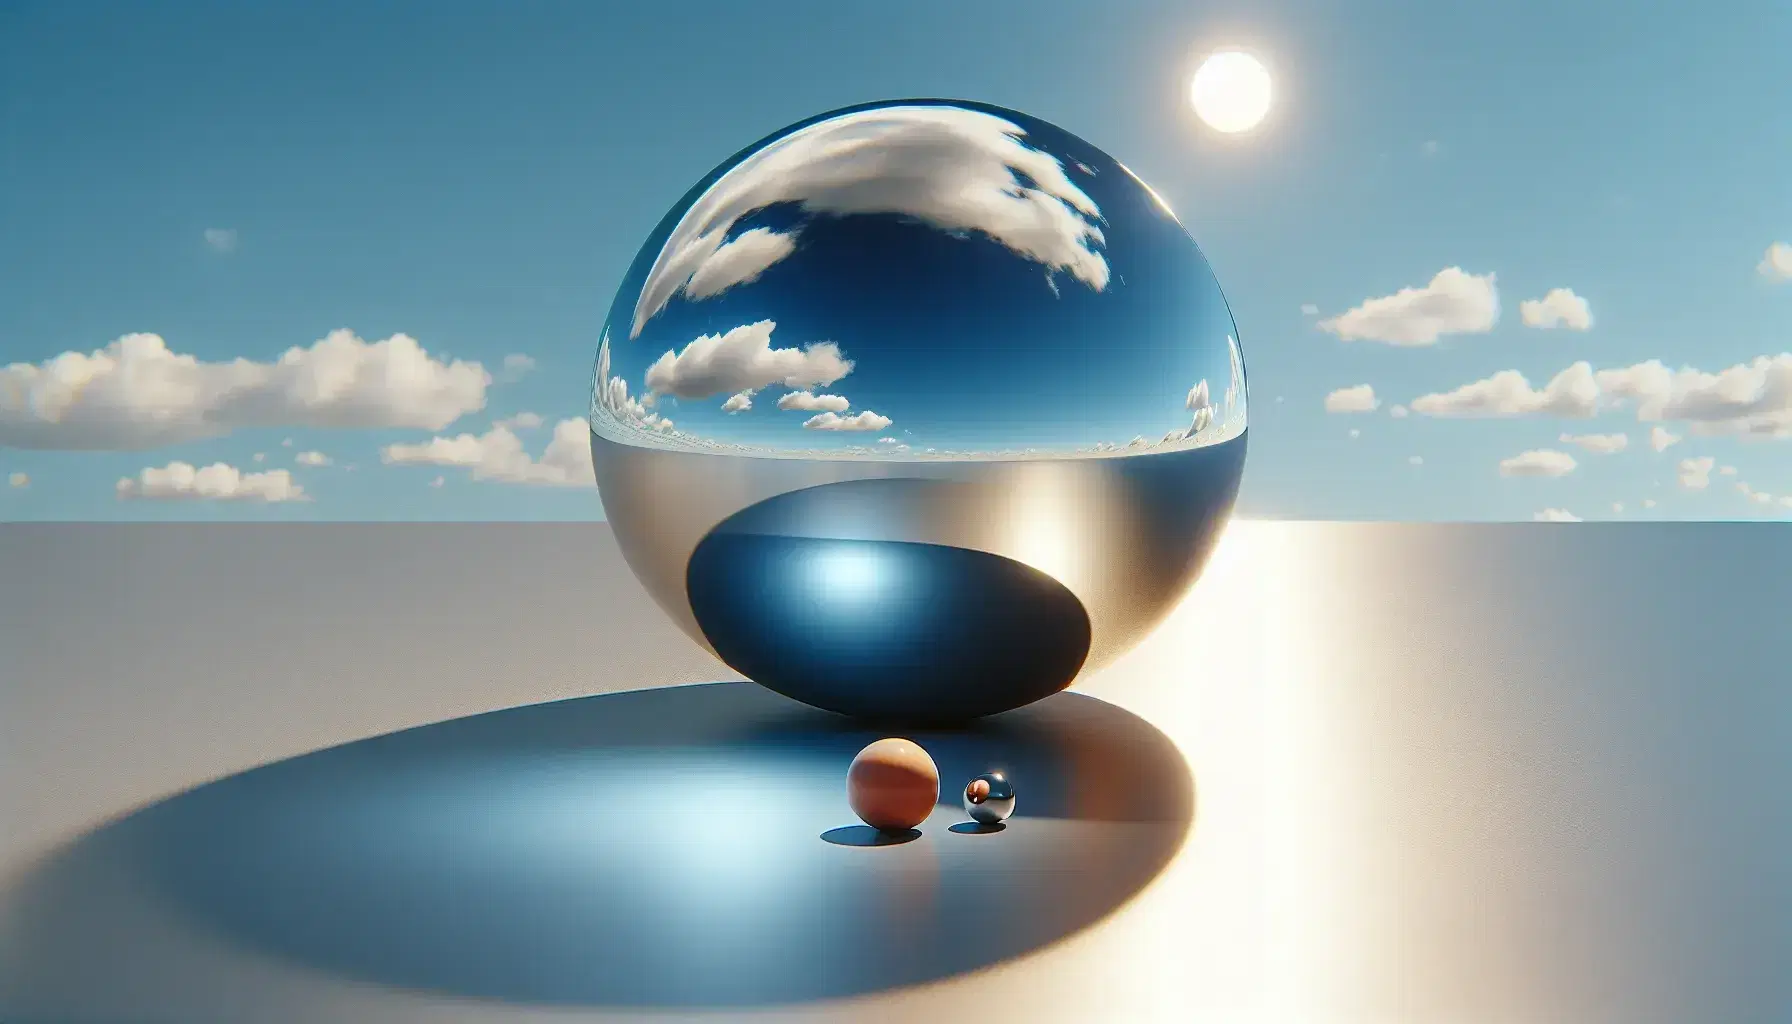 Large glossy metallic sphere reflecting blue sky and clouds on flat surface with smaller spheres and compass indicating geometry and light interaction.